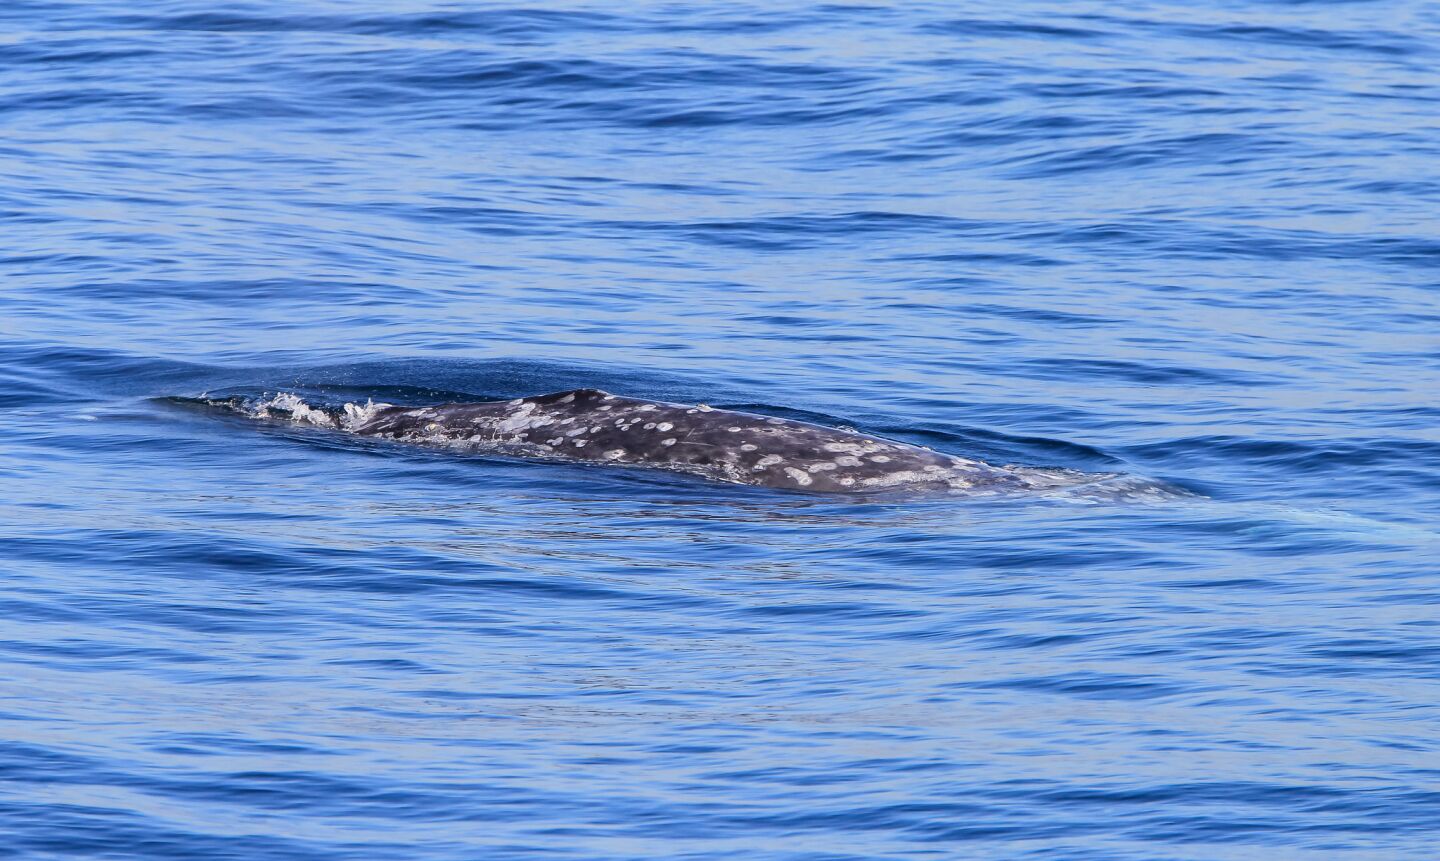 An Eastern Pacific gray whale surfaces.